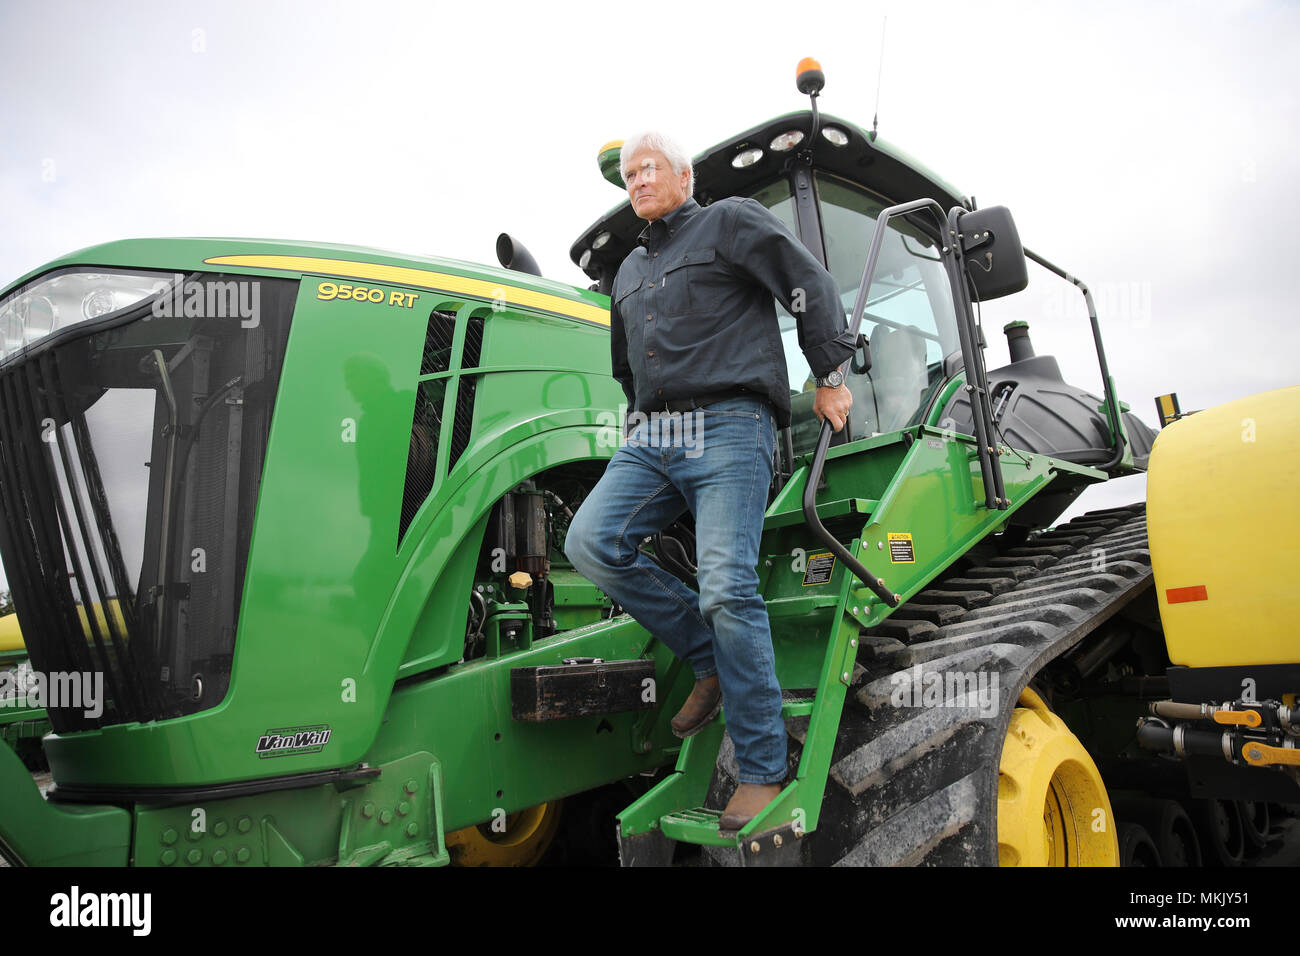 (180509) -- IOWA, May 9, 2018 (Xinhua) -- Rick Kimberley walks down a farming combine machine at his farm near Des Moines, capital of Iowa State, May 3, 2018. Rick and his son, Grant, grow more than 4,000 acres of corn and soybeans with a couple of hired hands and massive combines whose computers precisely track yield, moisture and other key statistics for each row and acre. He has been to China 15 times in recent years to talk about precision farming and other tricks of his trade, becoming an ambassador for modern farming methods in China. As for the current trade tensions between the United Stock Photo